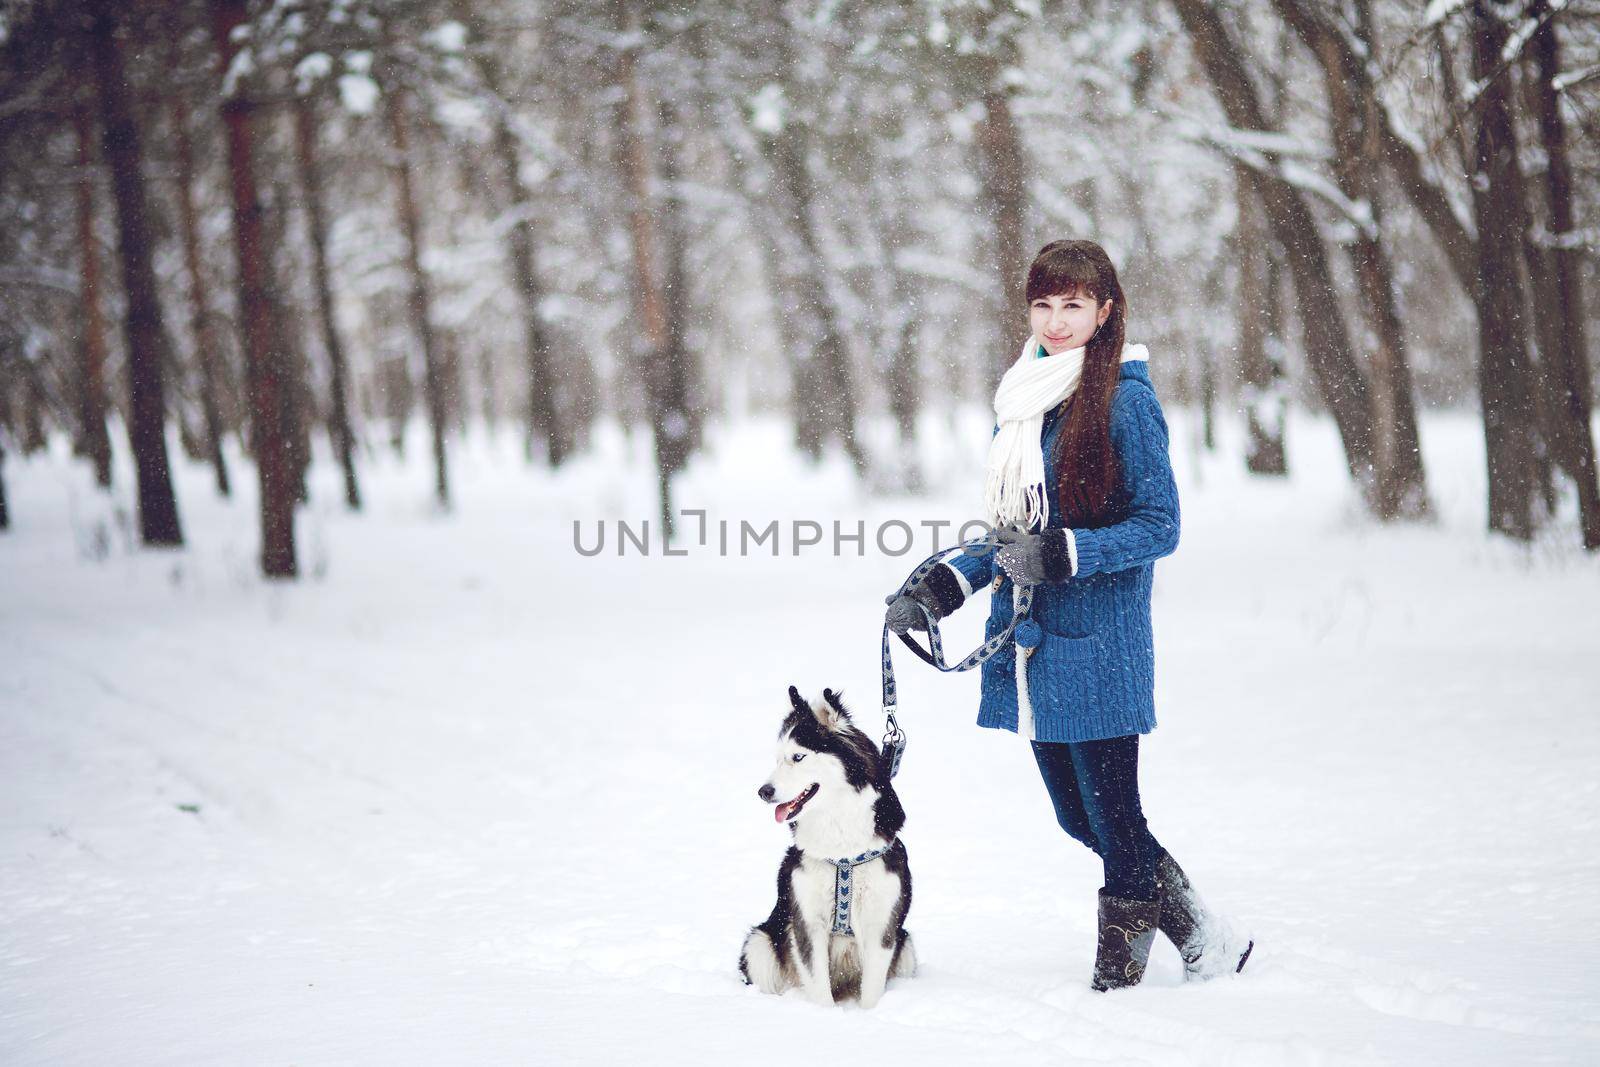 The girl walks with dog siberian husky in a winter snowy forest. 